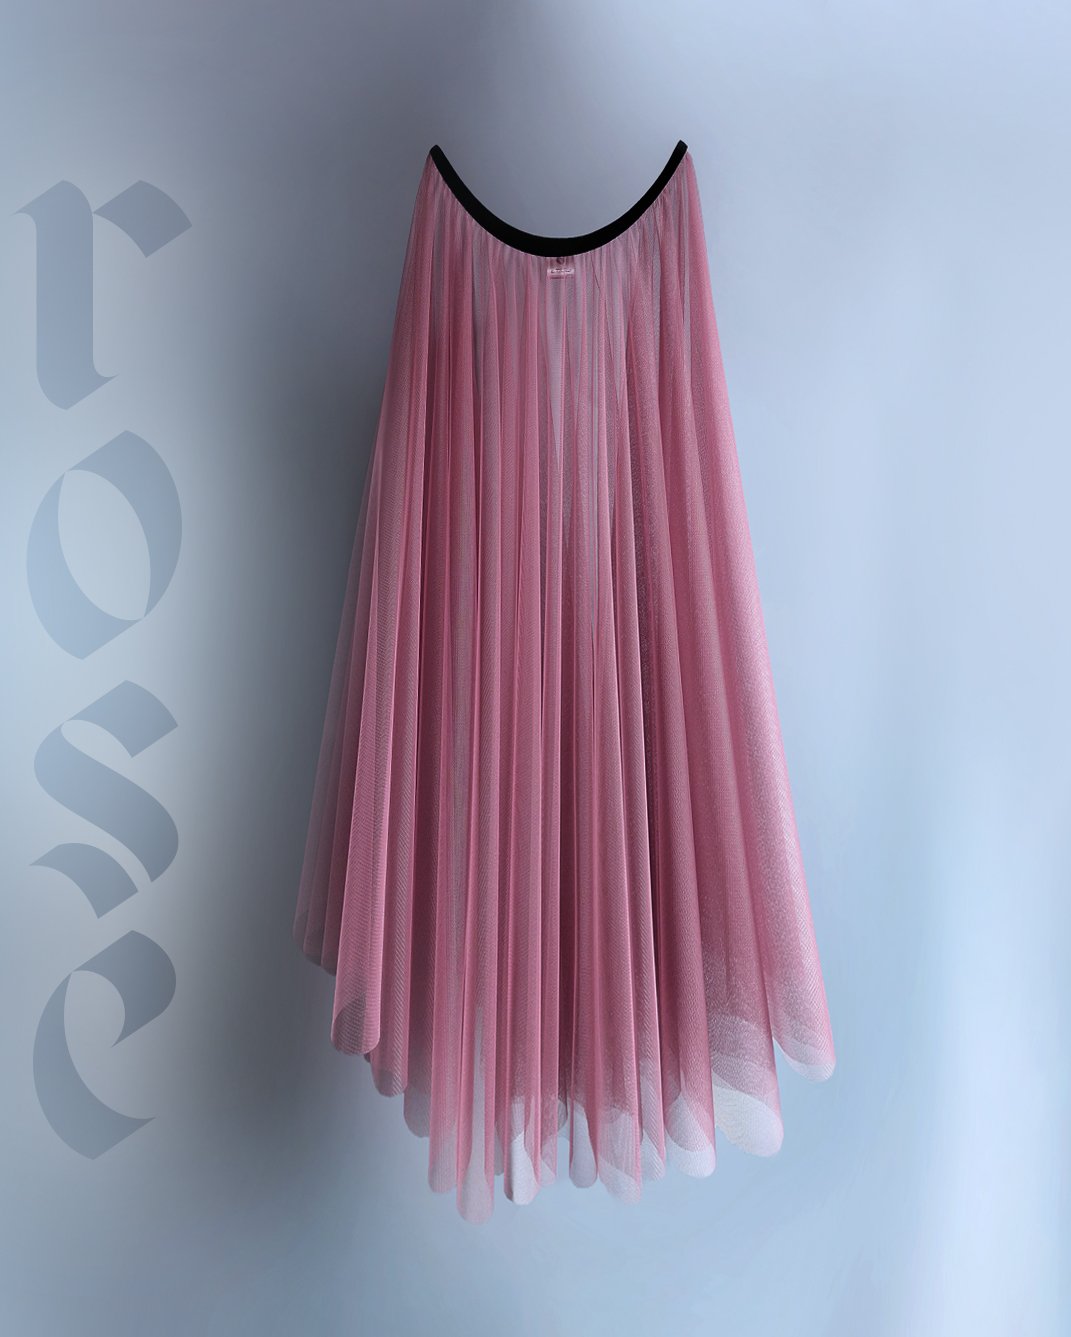 Ballet and dance long tulle circle skirt. Callisto dancewear for dance photography. Color old rose